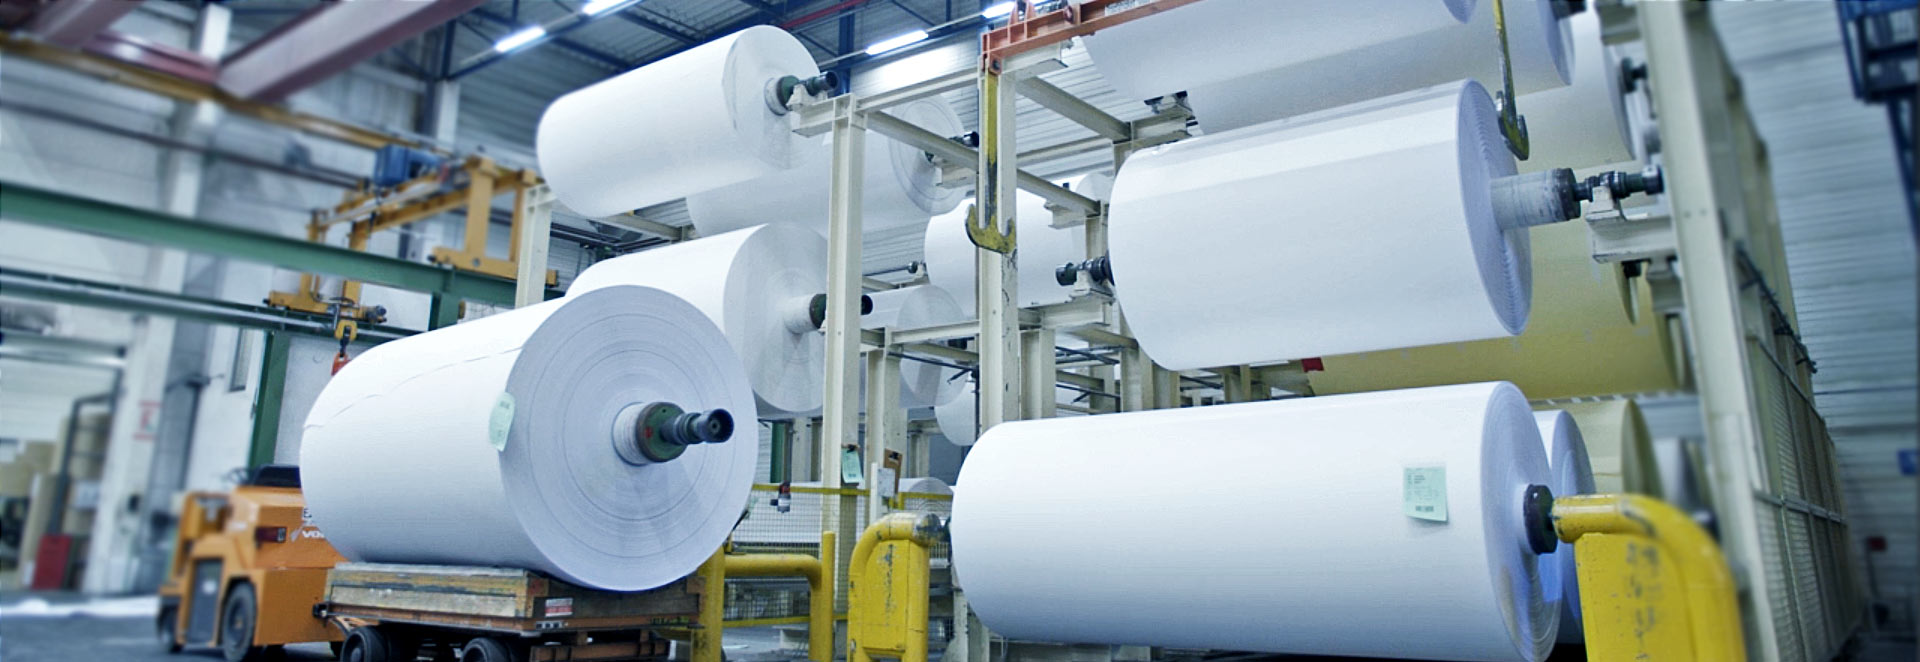 KRIKO Engineering - Drive or process control technology - broad portfolio of services in the paper industry